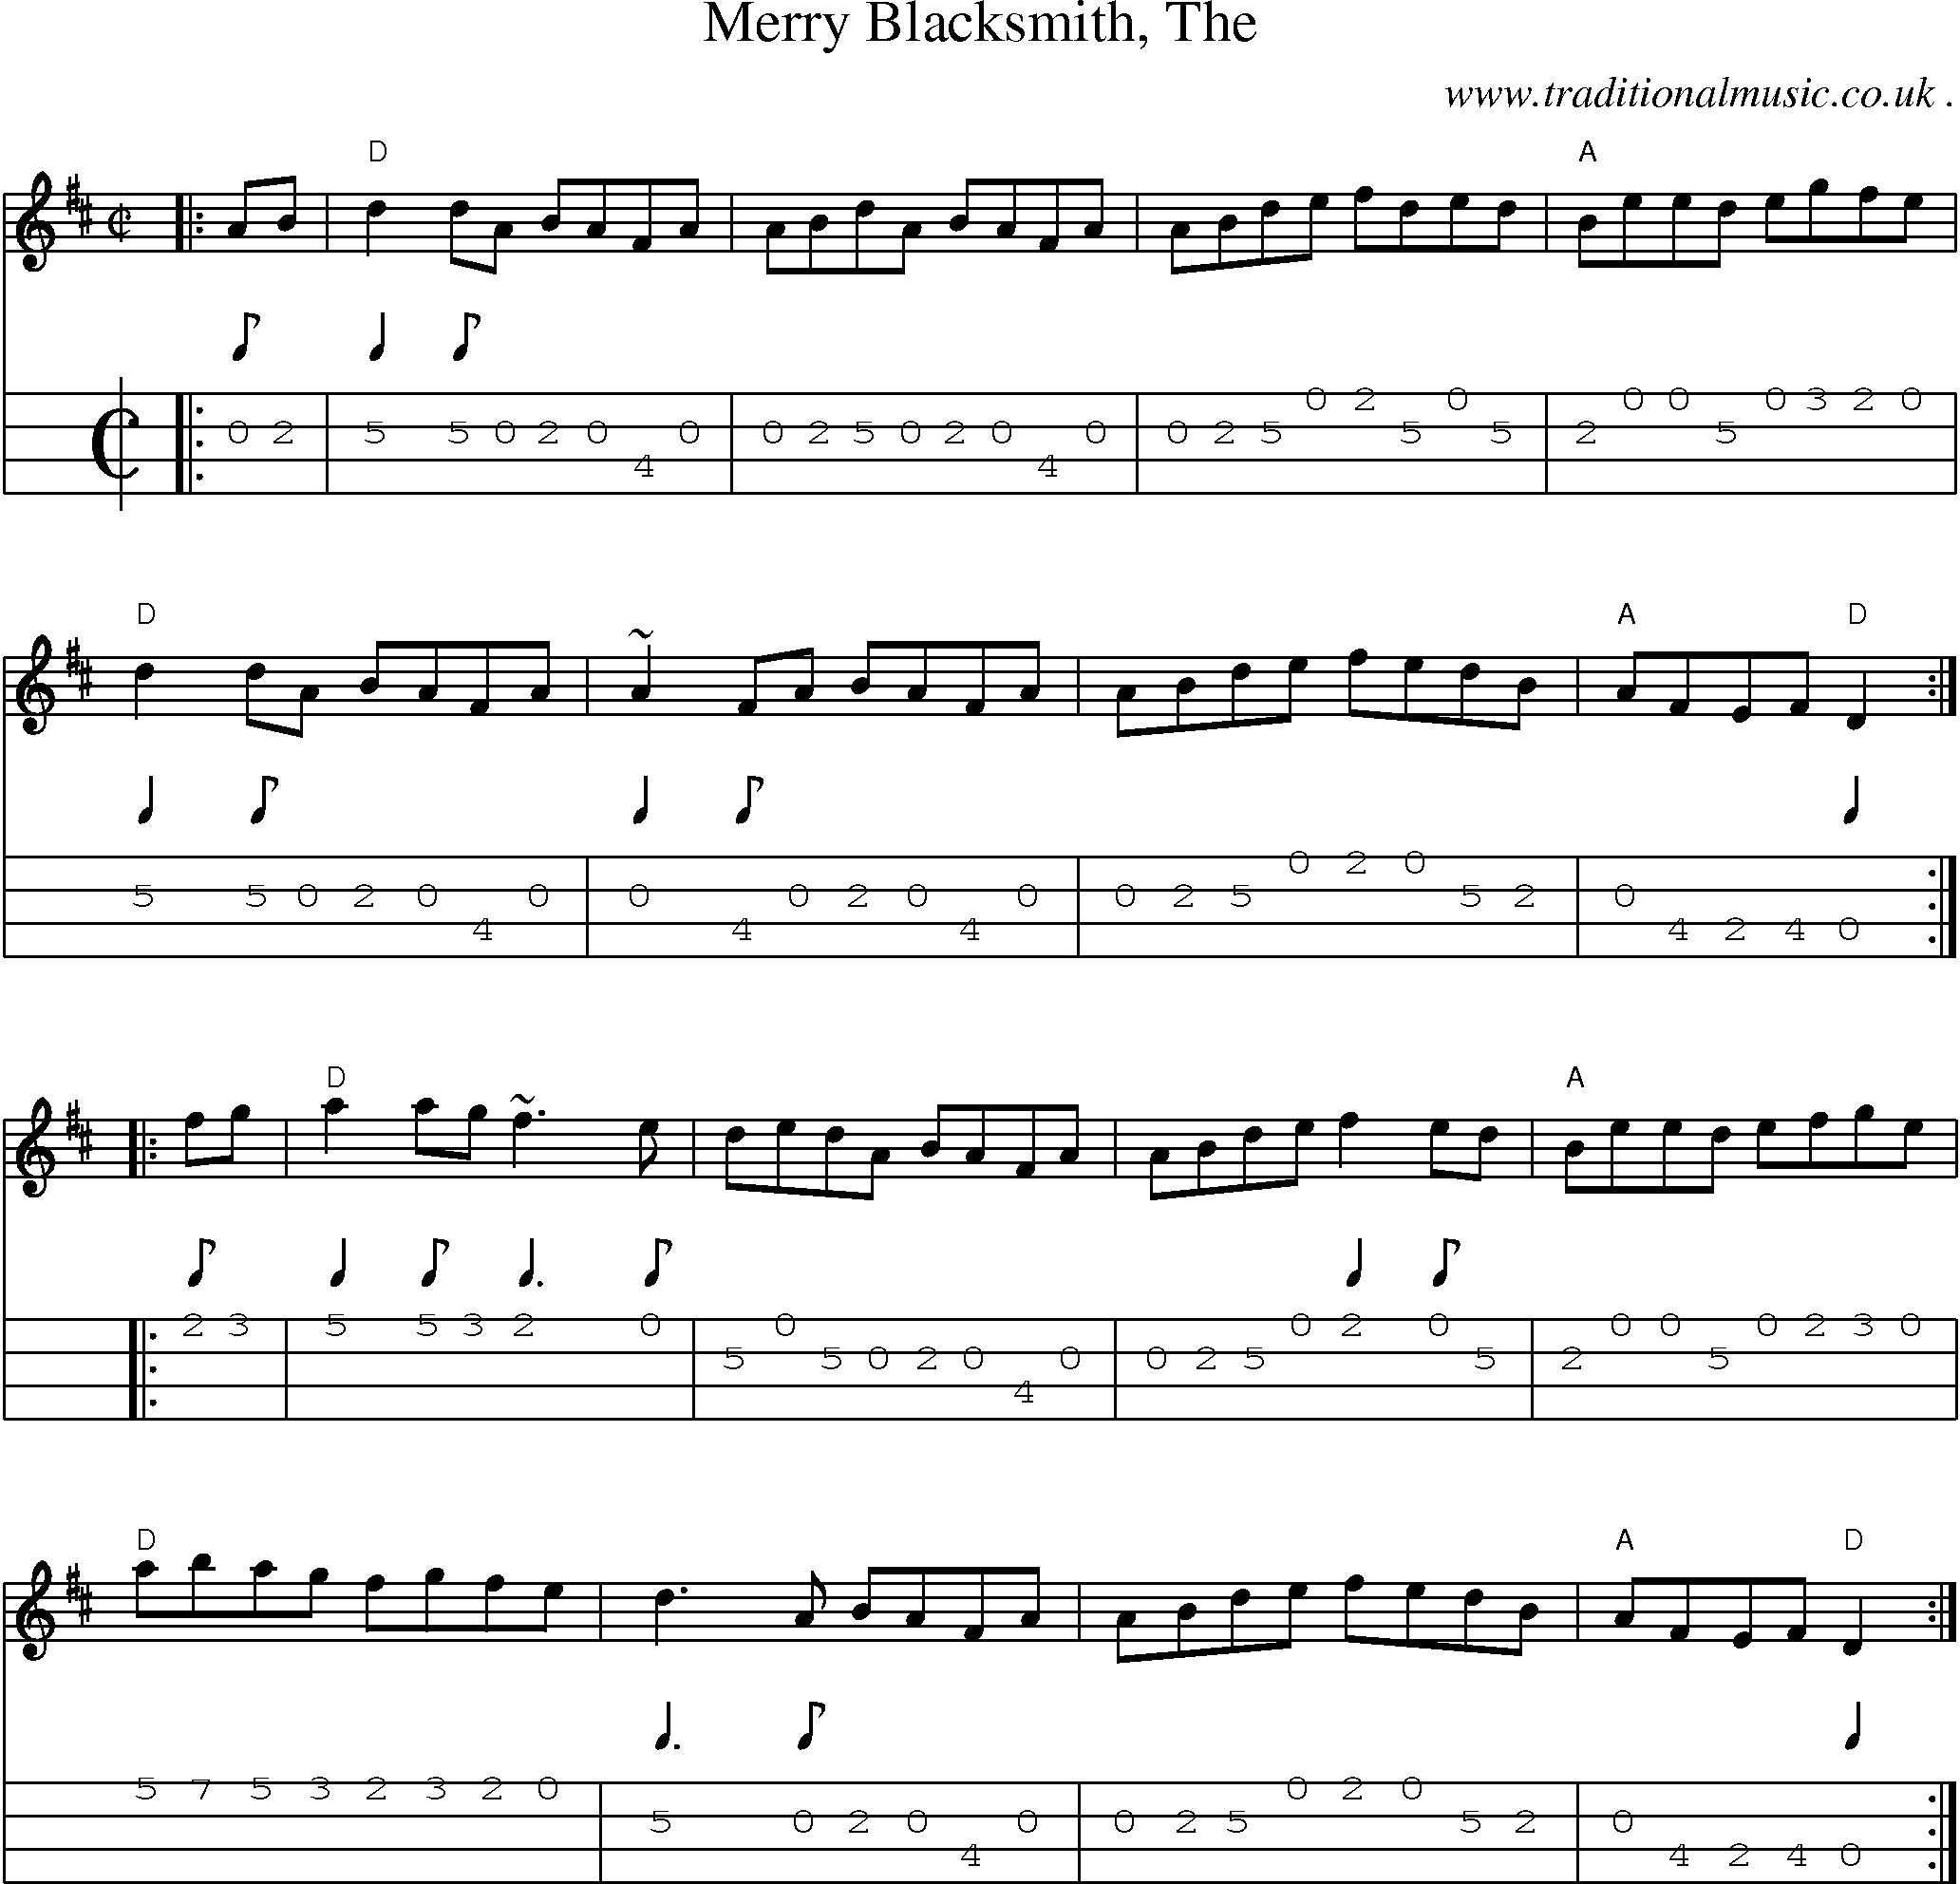 Music Score and Guitar Tabs for Merry Blacksmith The